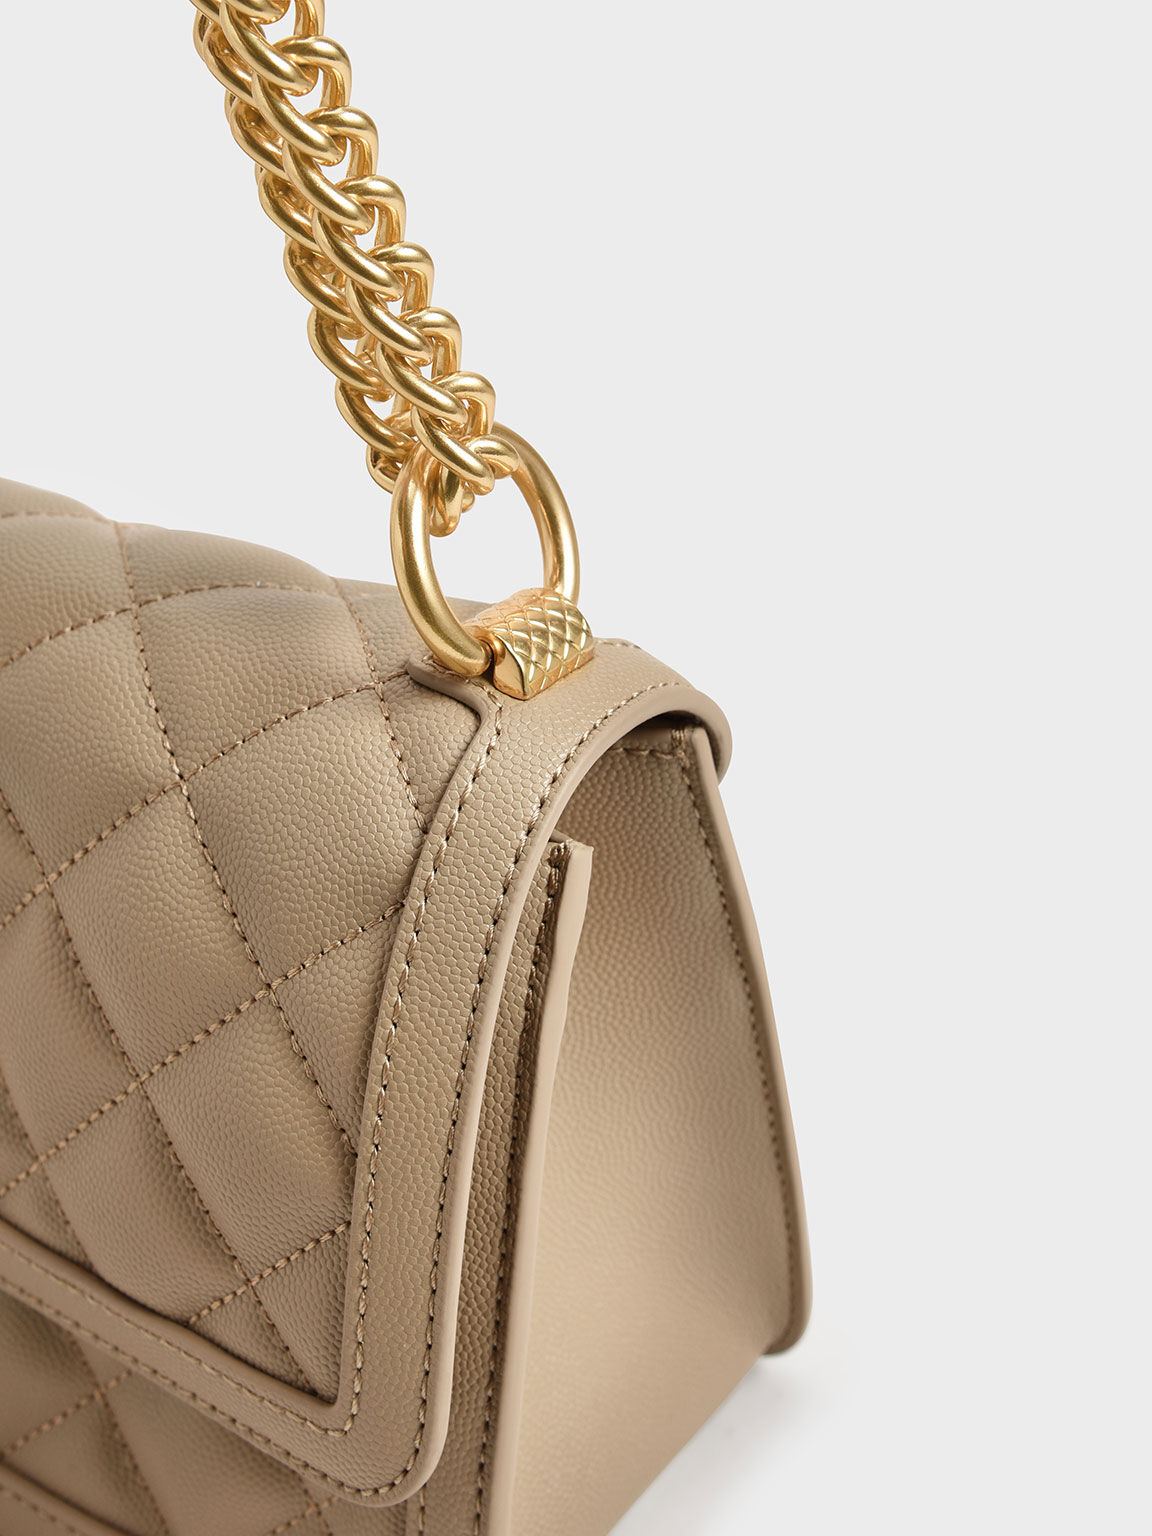 TÚI CHARLES KEITH MICAELA QUILTED CHAIN BAG 16